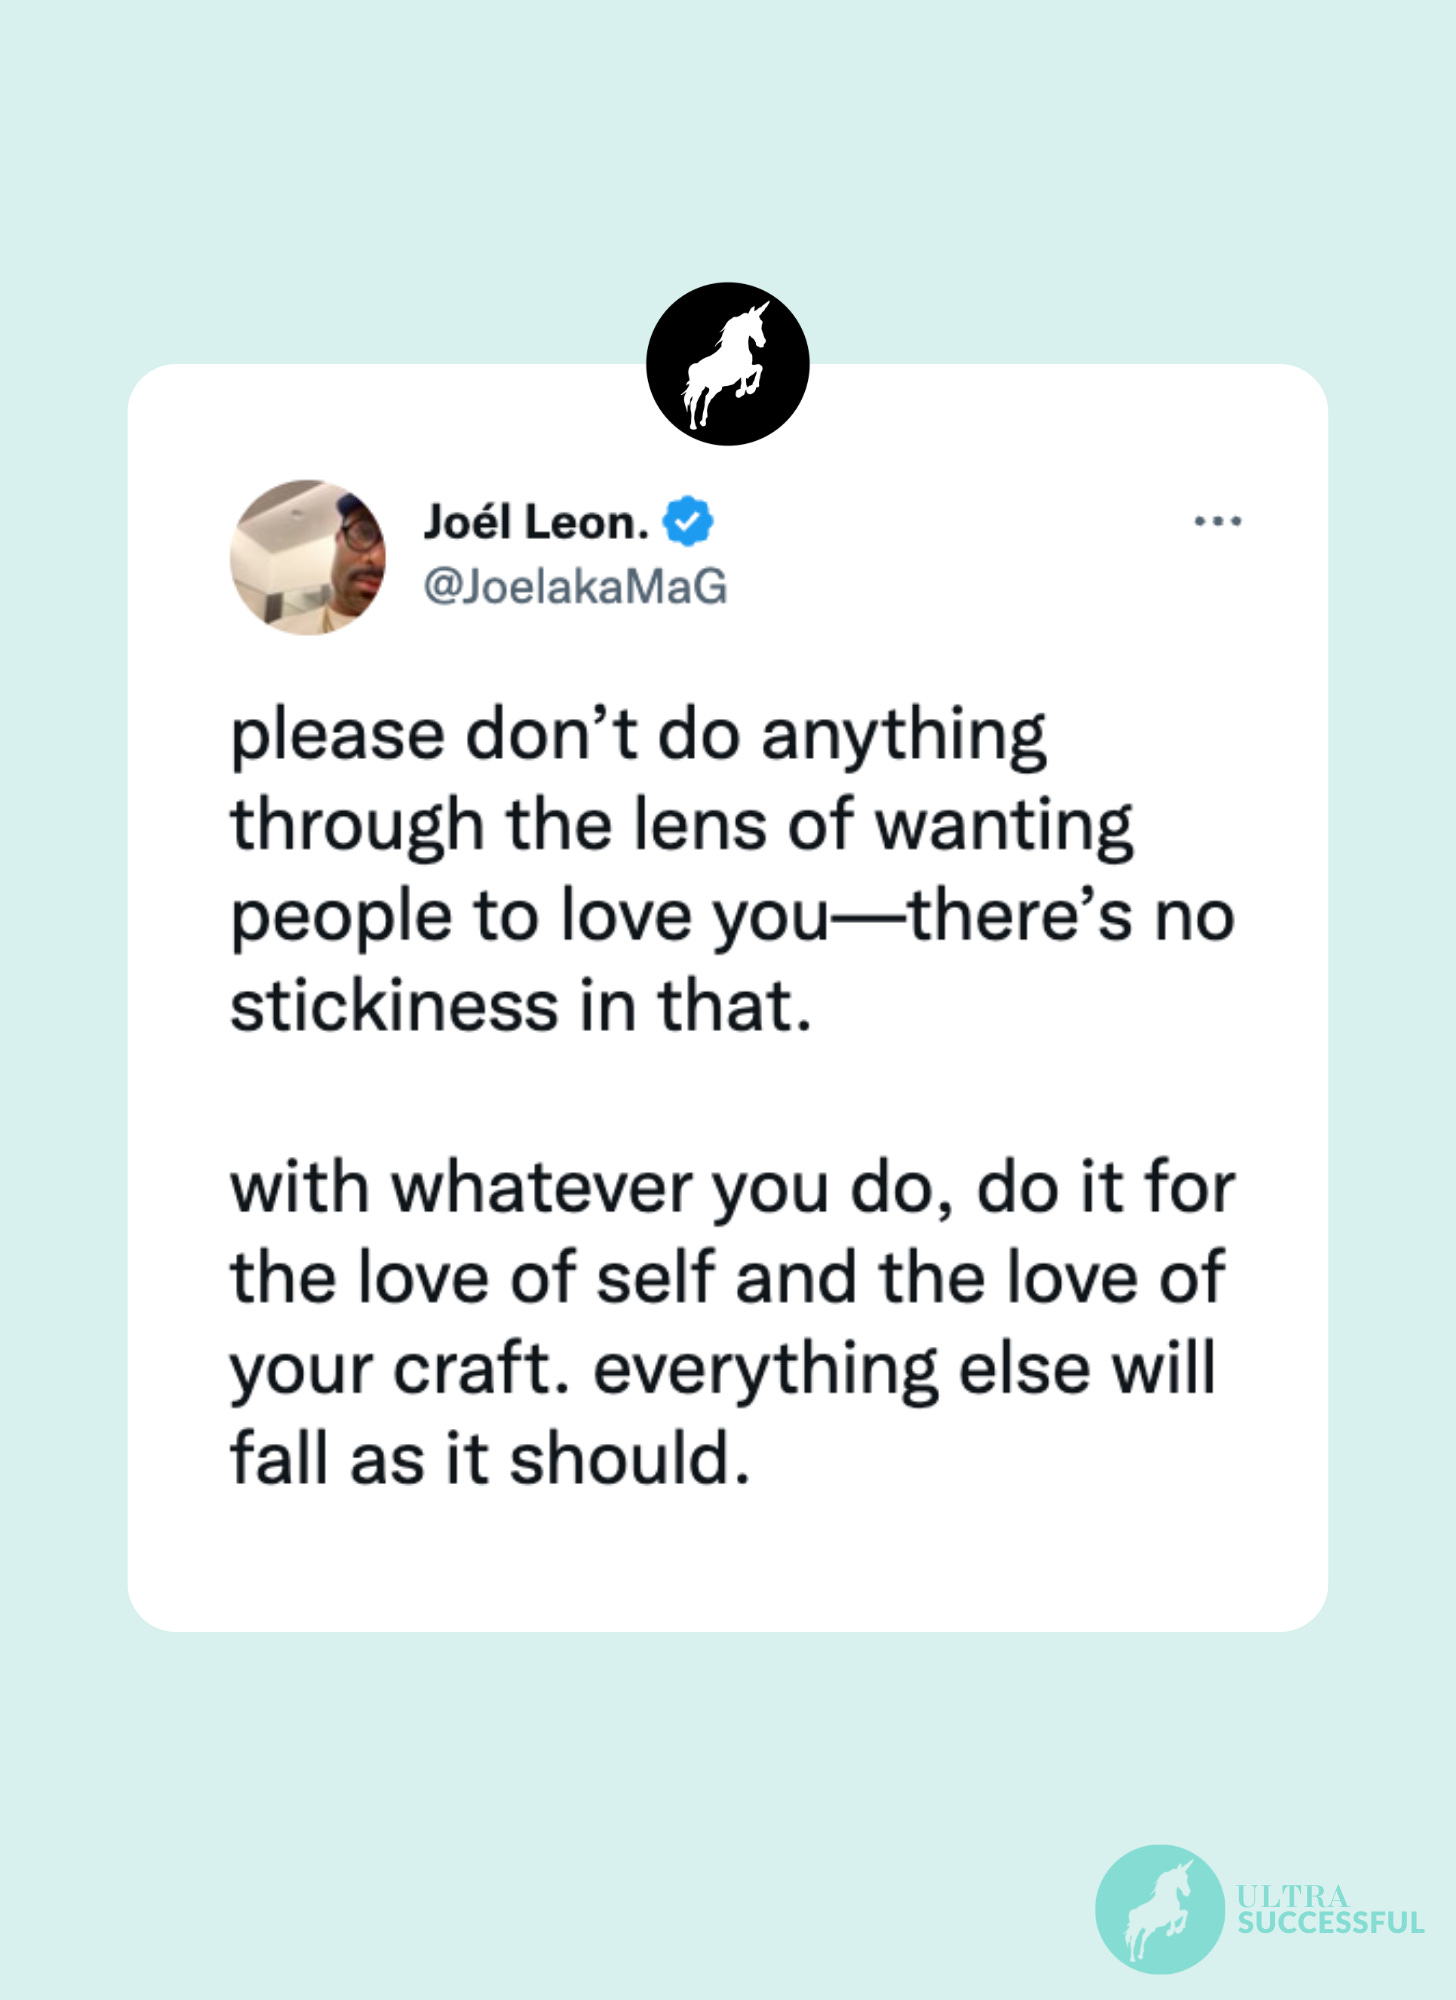 @JoelakaMaG: please don’t do anything through the lens of wanting people to love you—there’s no stickiness in that.  with whatever you do, do it for the love of self and the love of your craft. everything else will fall as it should.